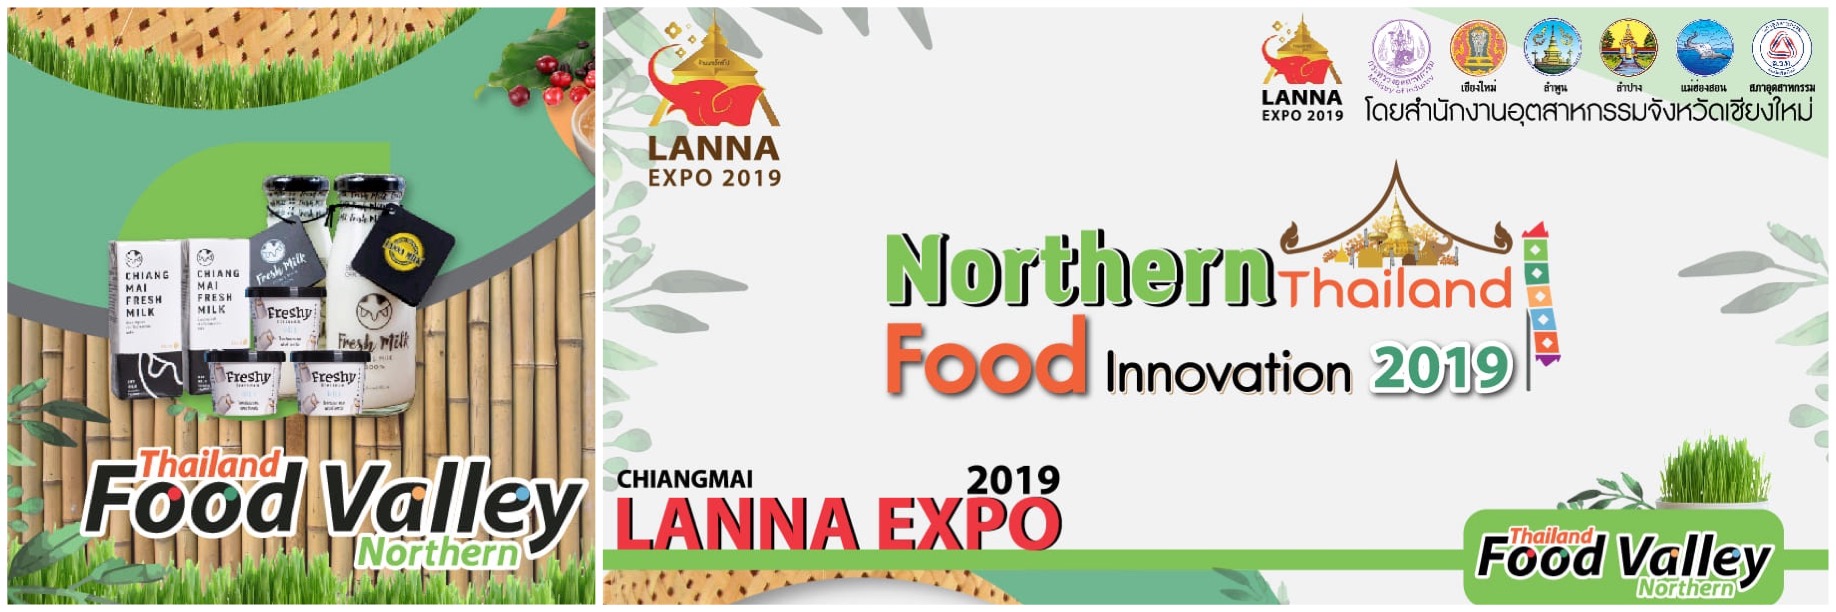 LannaExpo2019NorthernFoodValley(Innovation)2019CoverMontage